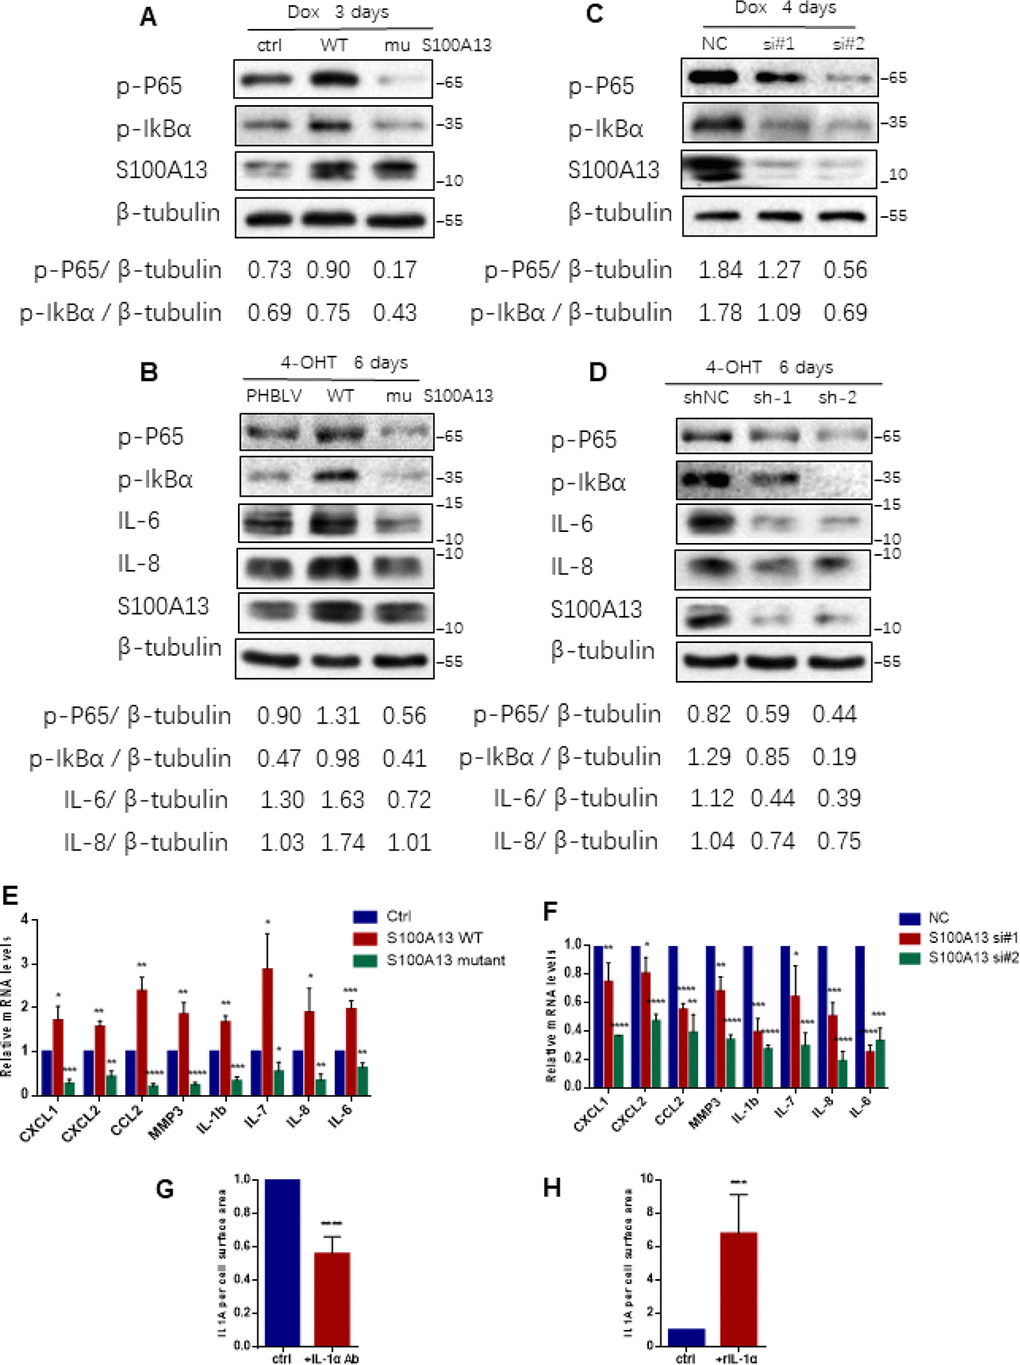 S100A13 modulates NF-κB activity and SASP expression during cell senescence